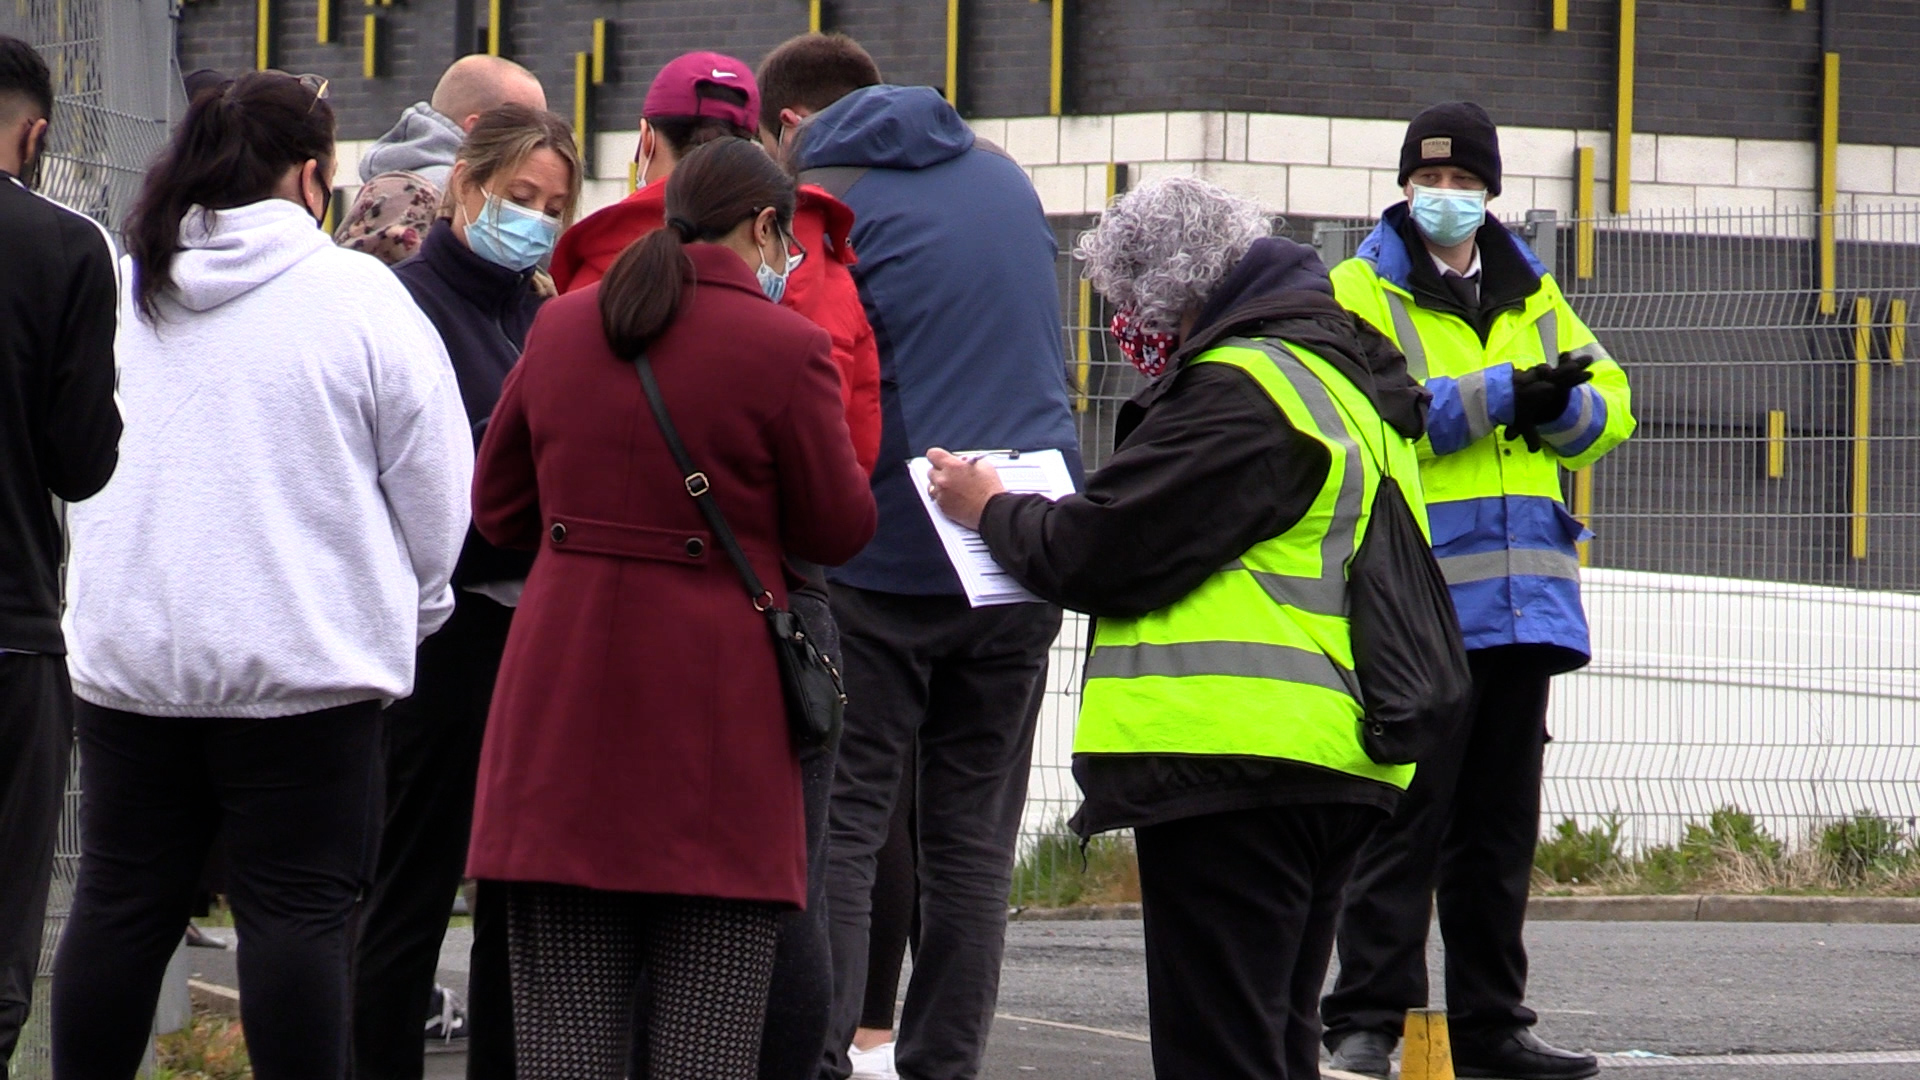 People queue for the vaccination centre at the Essa Academy in Bolton. The Indian coronavirus variant has been detected in a number of areas in England, including Bolton, which are reporting the highest rates of infection, data suggests. Picture date: